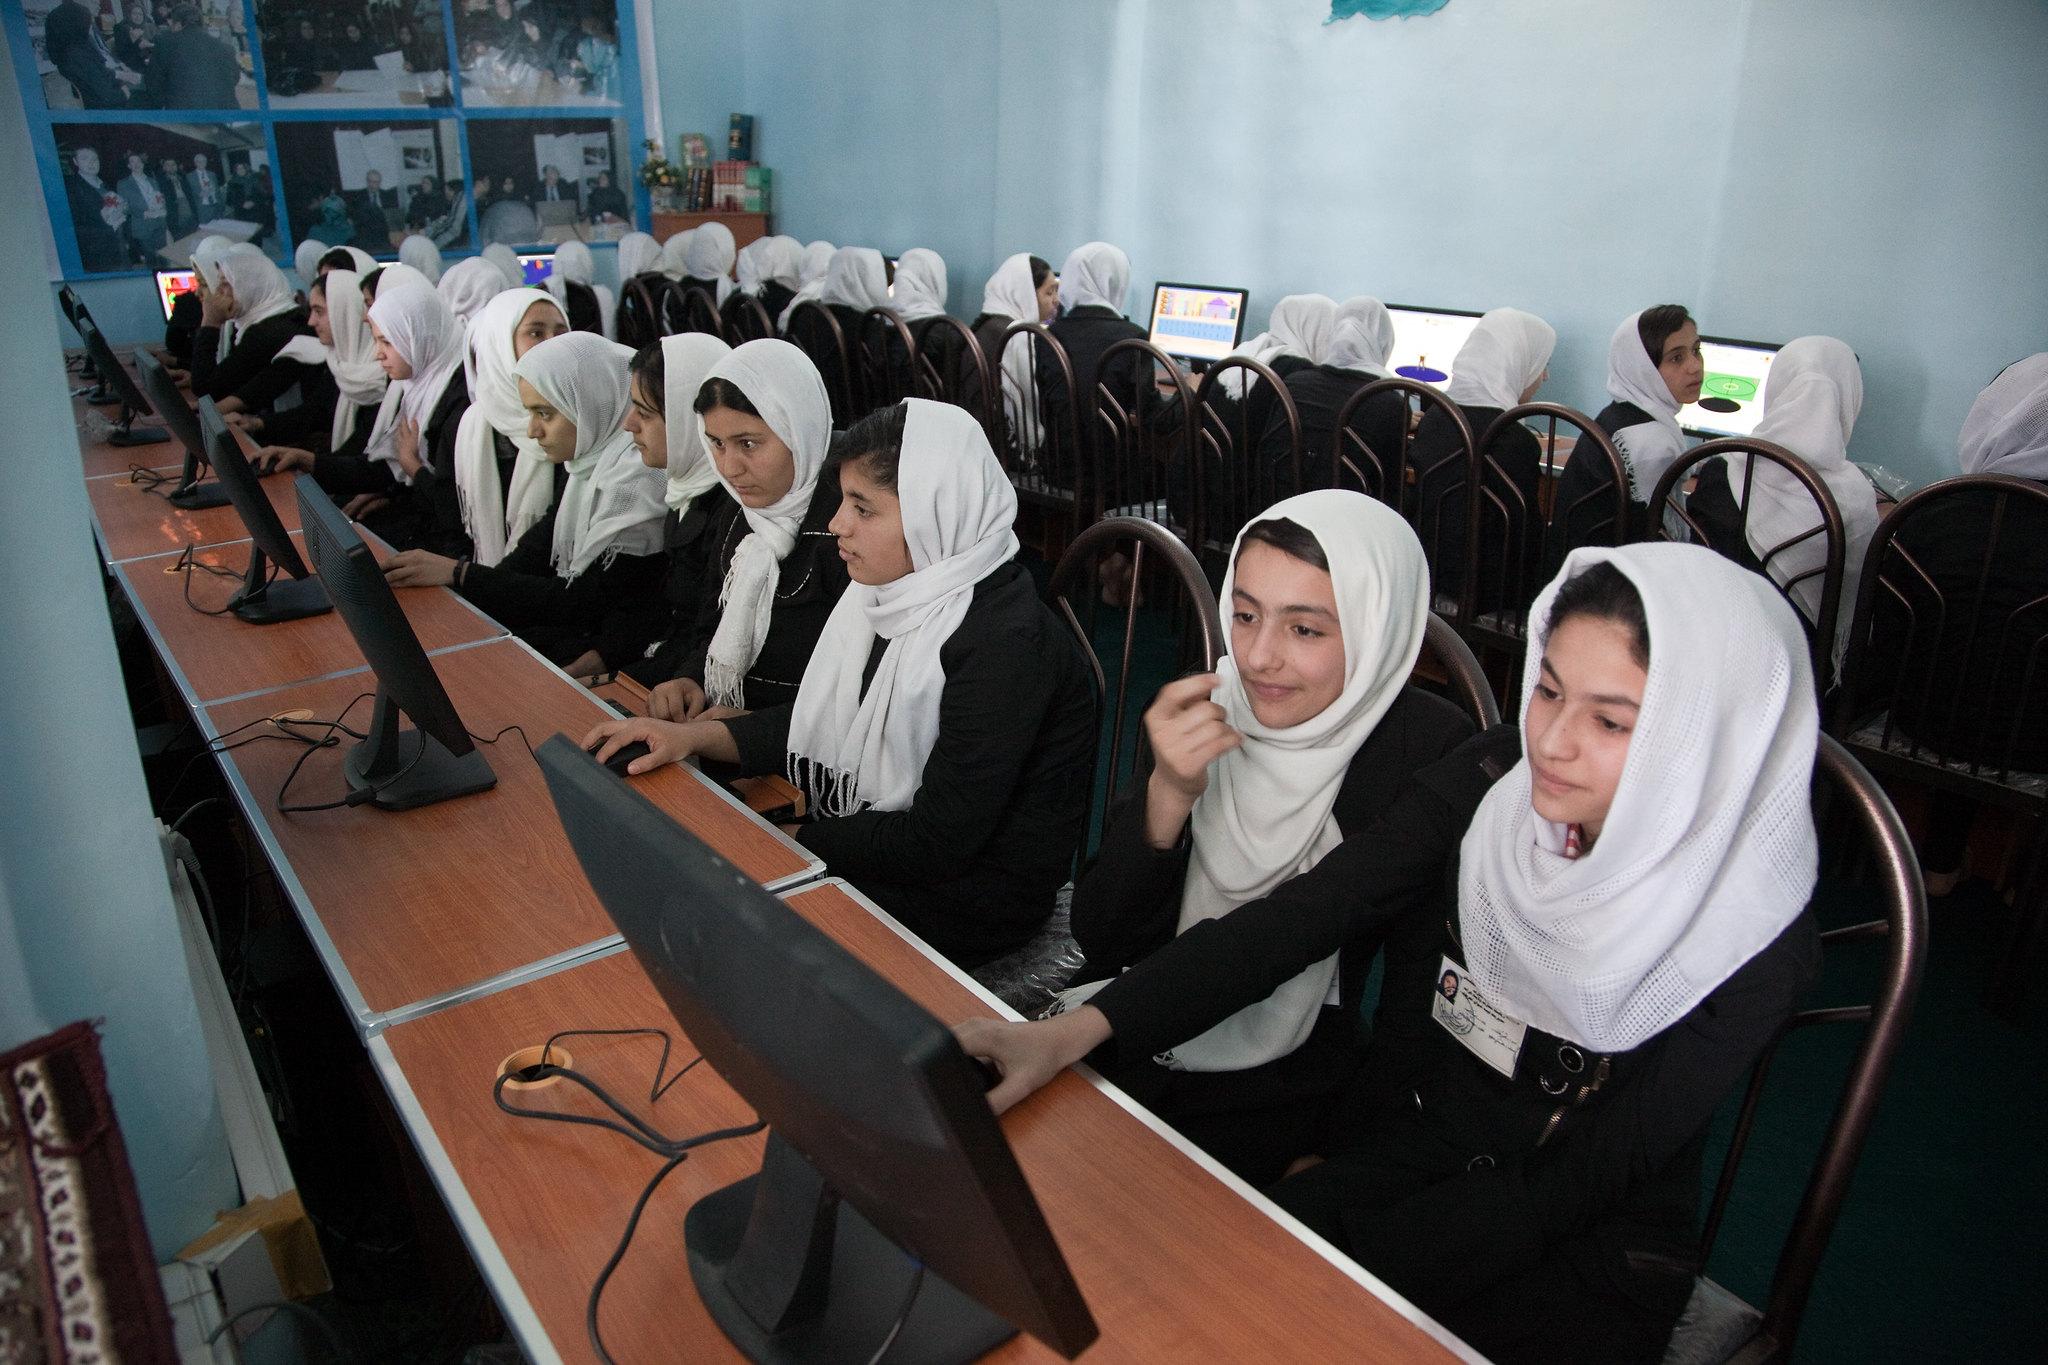 A computer class is conducted at the high school in Herat, Afghanistan.